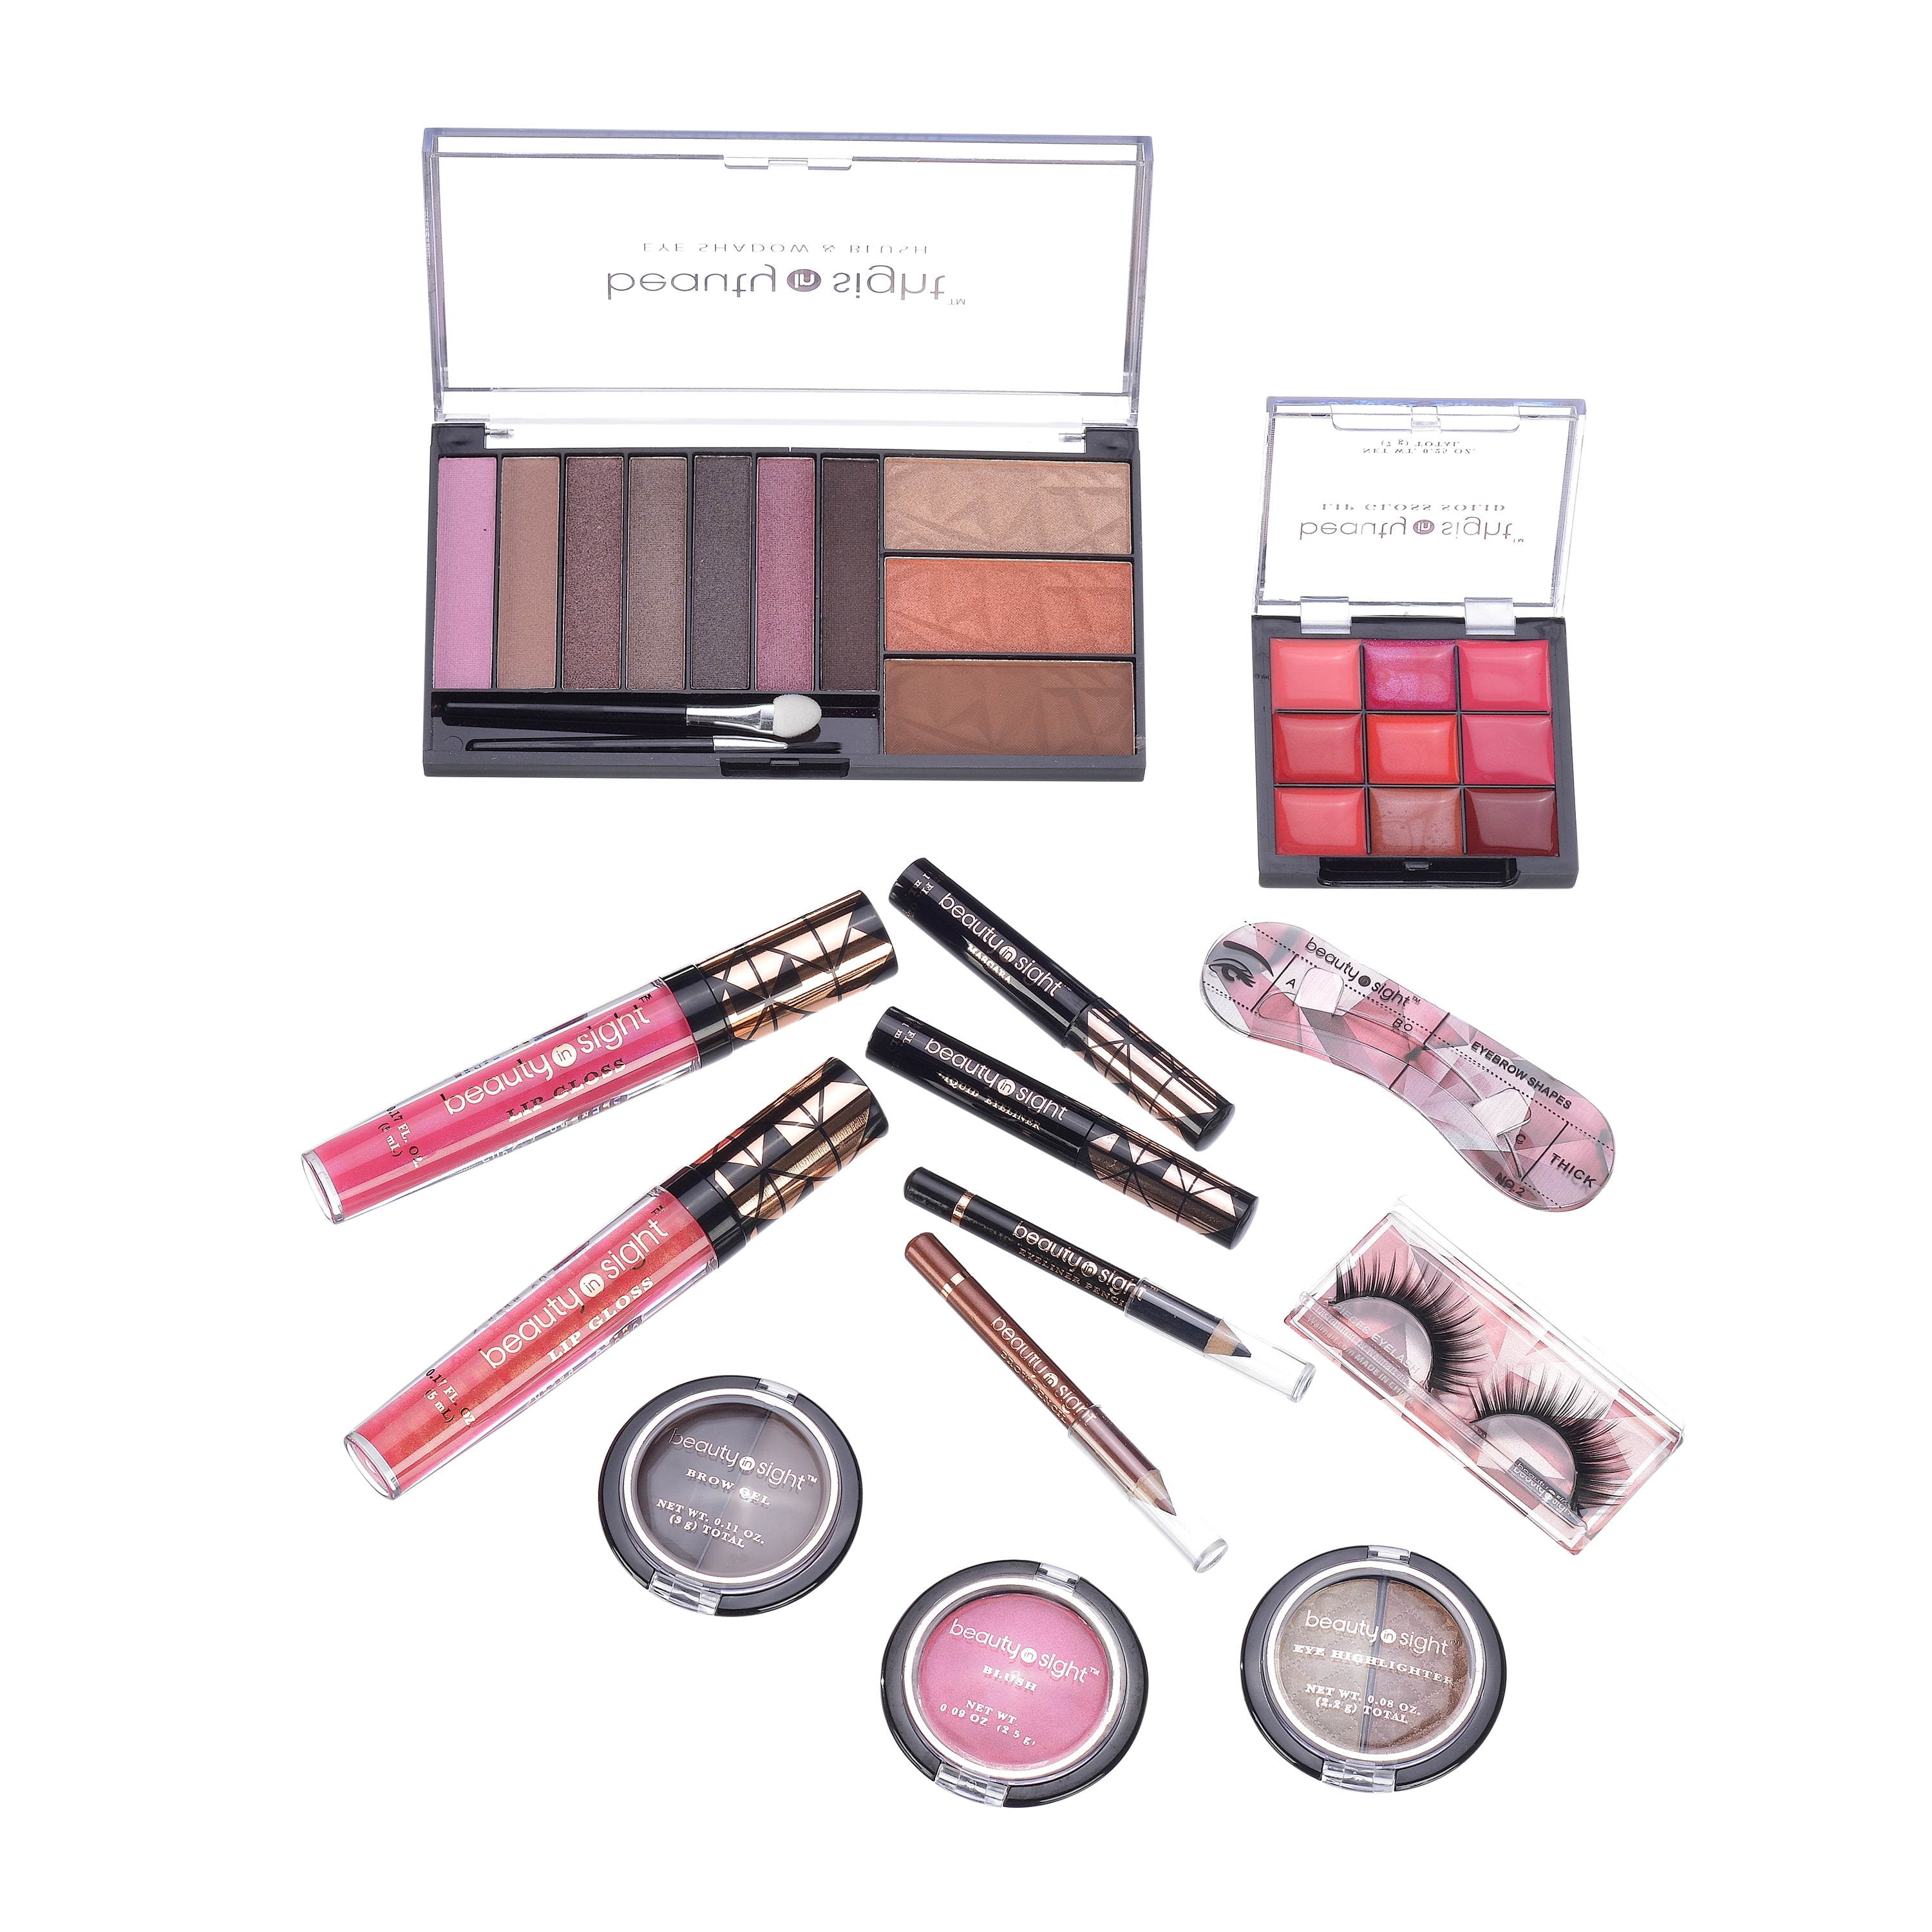 Beauty In Sight Makeup & Cosmetics Gift Set, 36 Pieces ($13 Value)